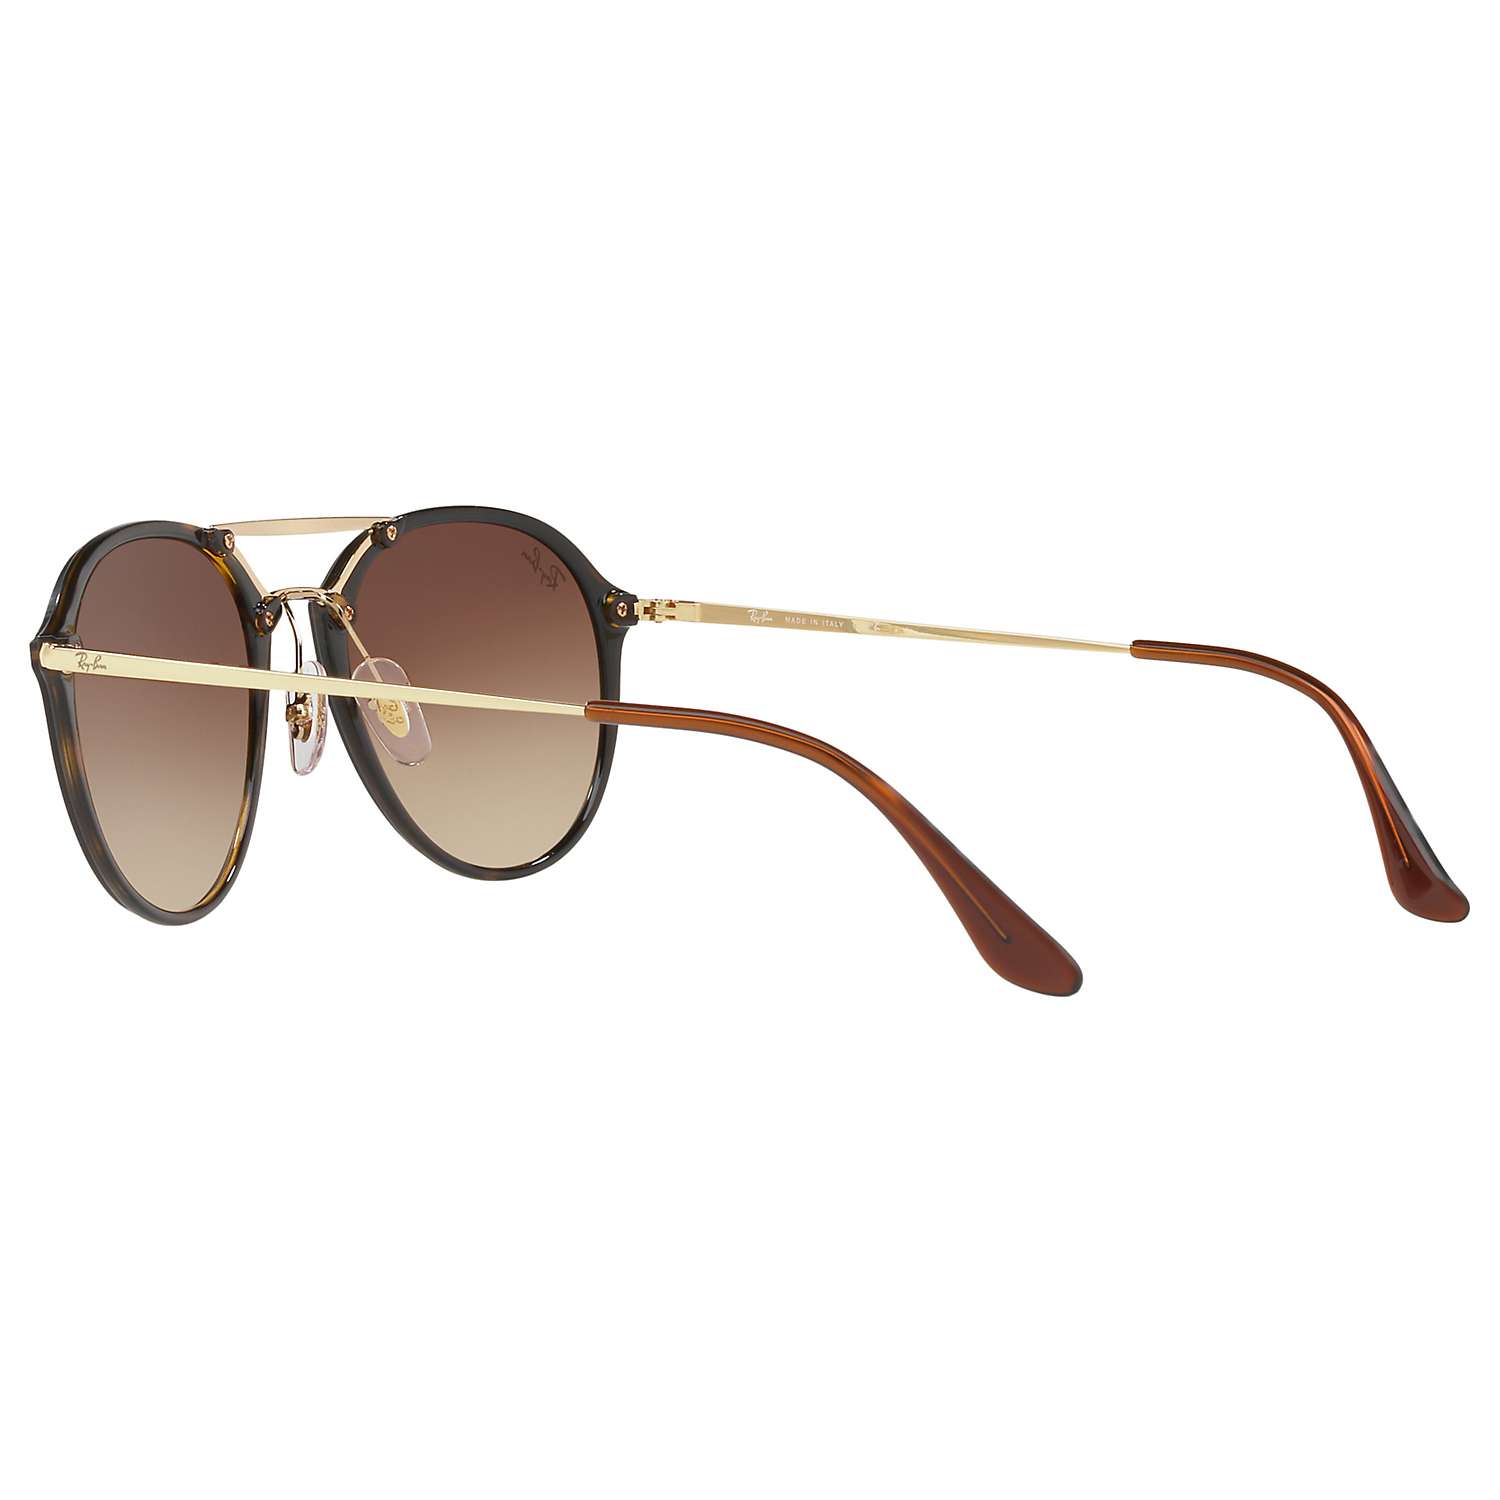 Buy Ray-Ban RB4292 Oval Blaze Sunglasses, Gold/Brown Online at johnlewis.com